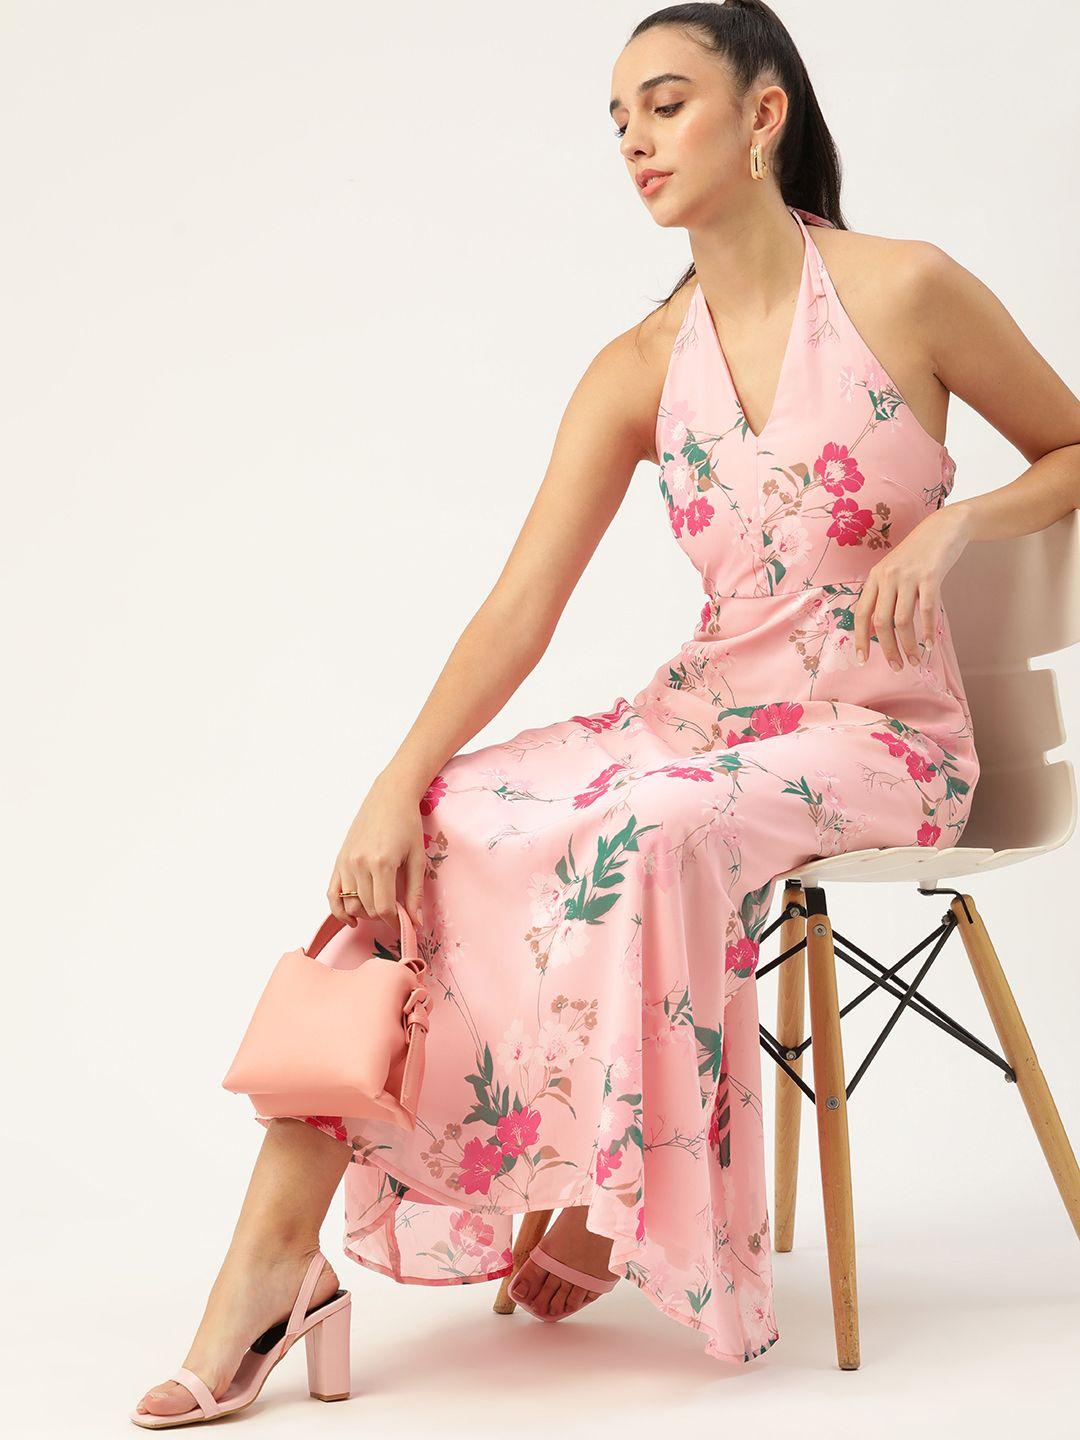 4wrd by dressberry pink floral print halter neck maxi dress